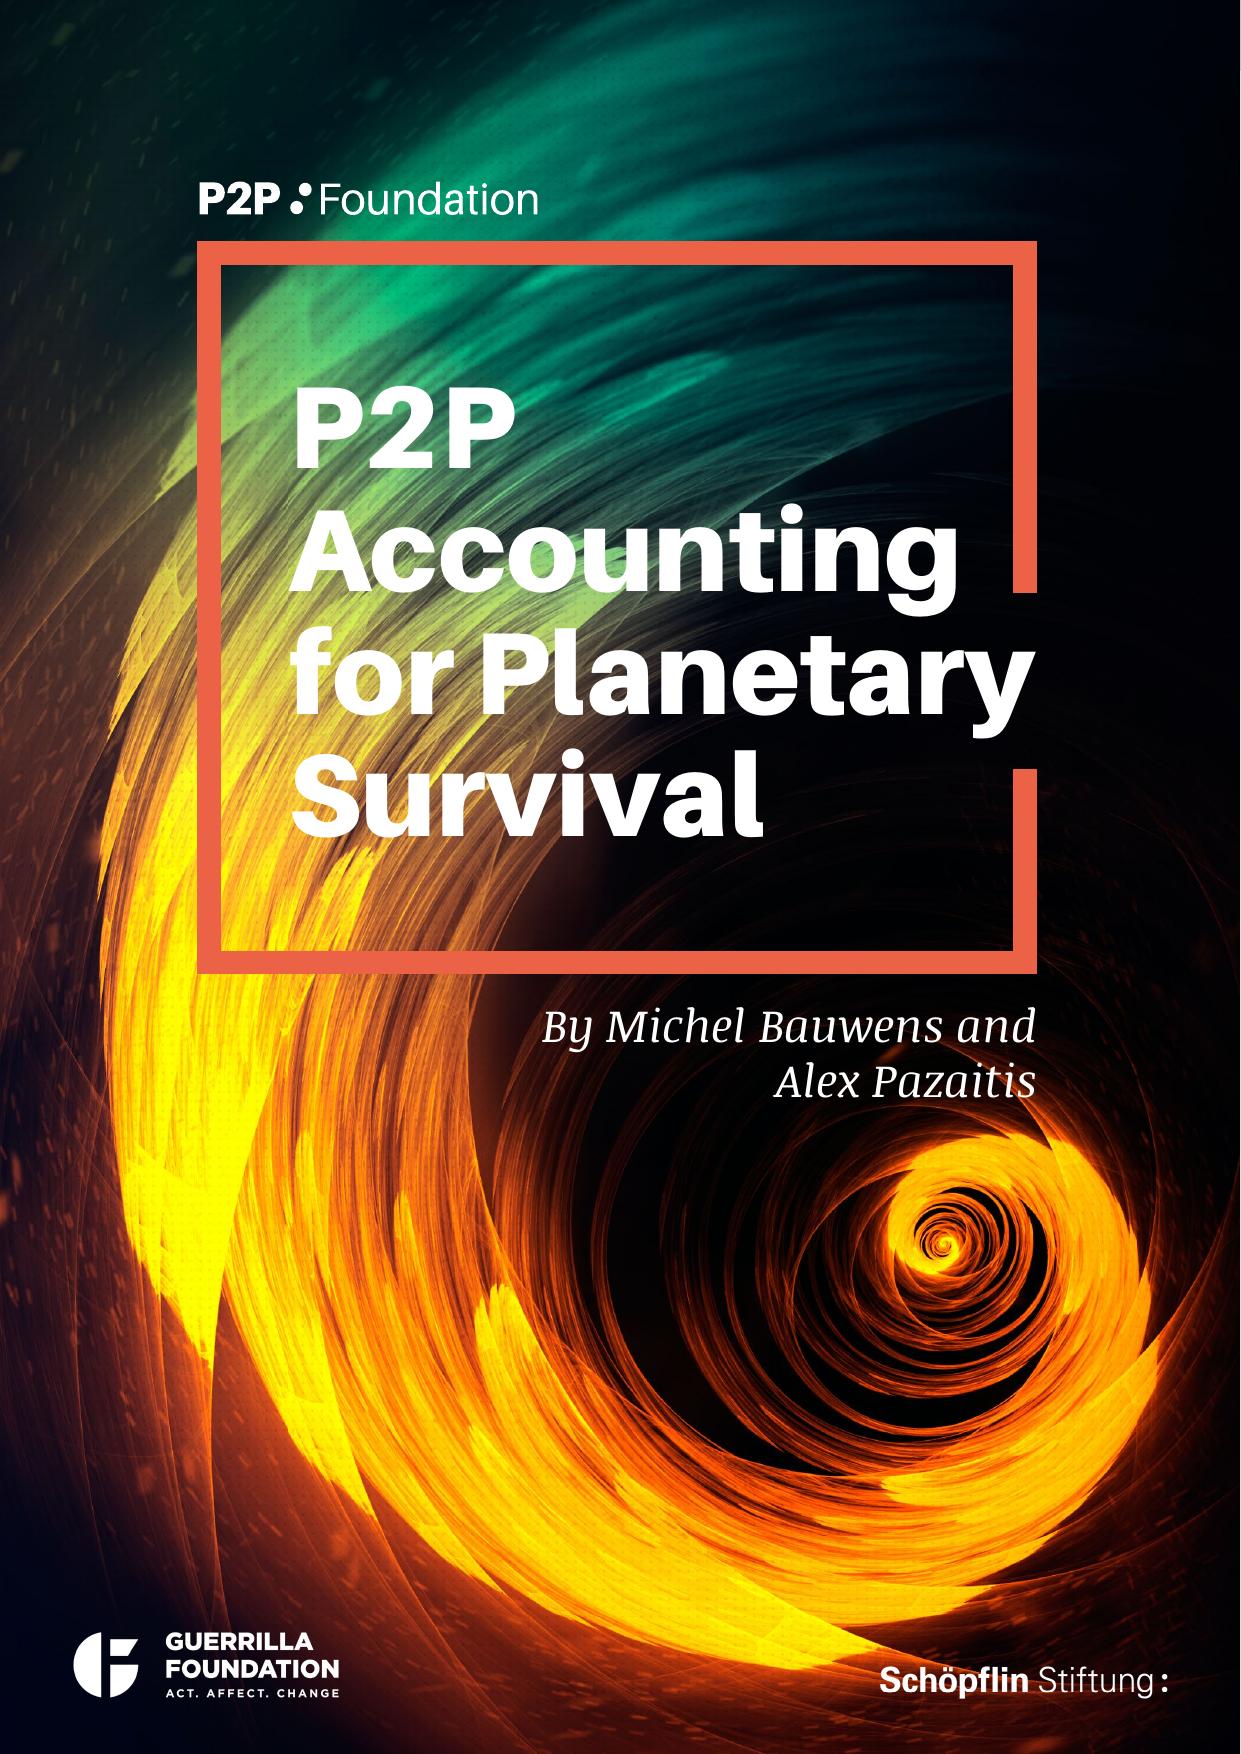 P2P Accounting for Planetary Survival